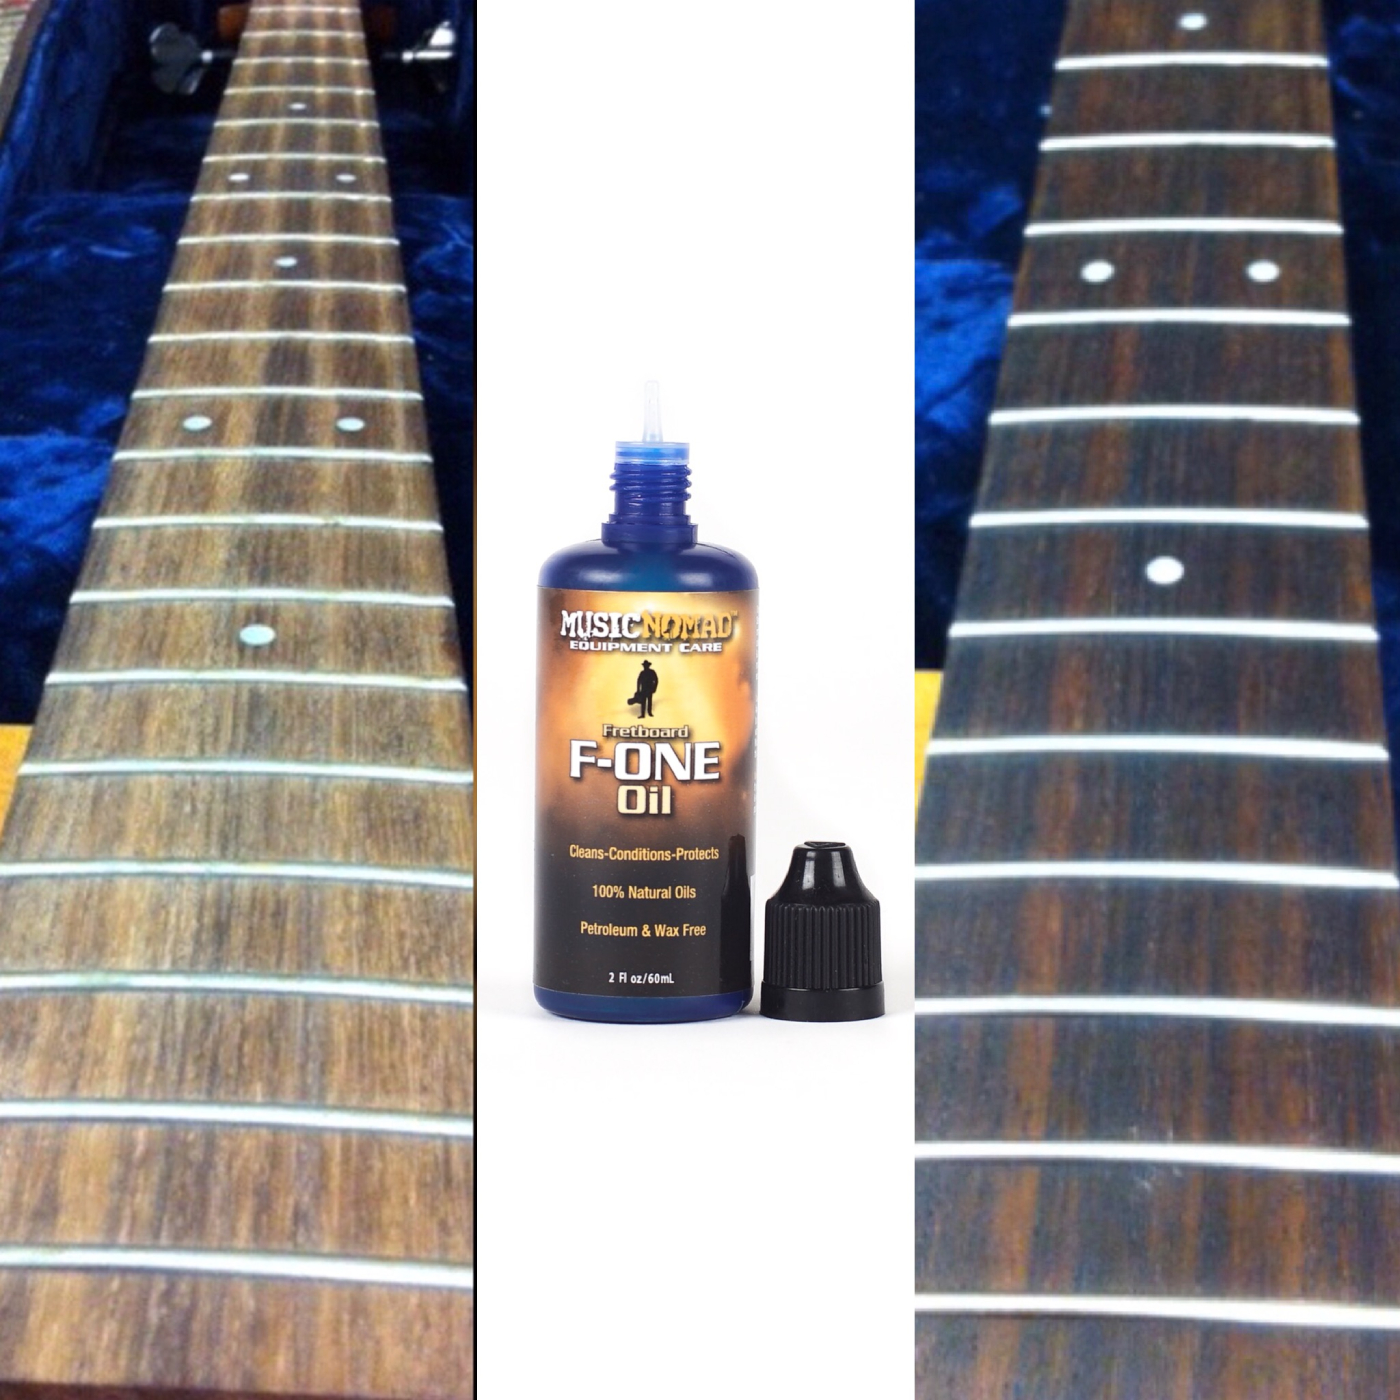 Musicnomad Mn105 - Fretboard F-one - Care & Cleaning Gitarre - Variation 1